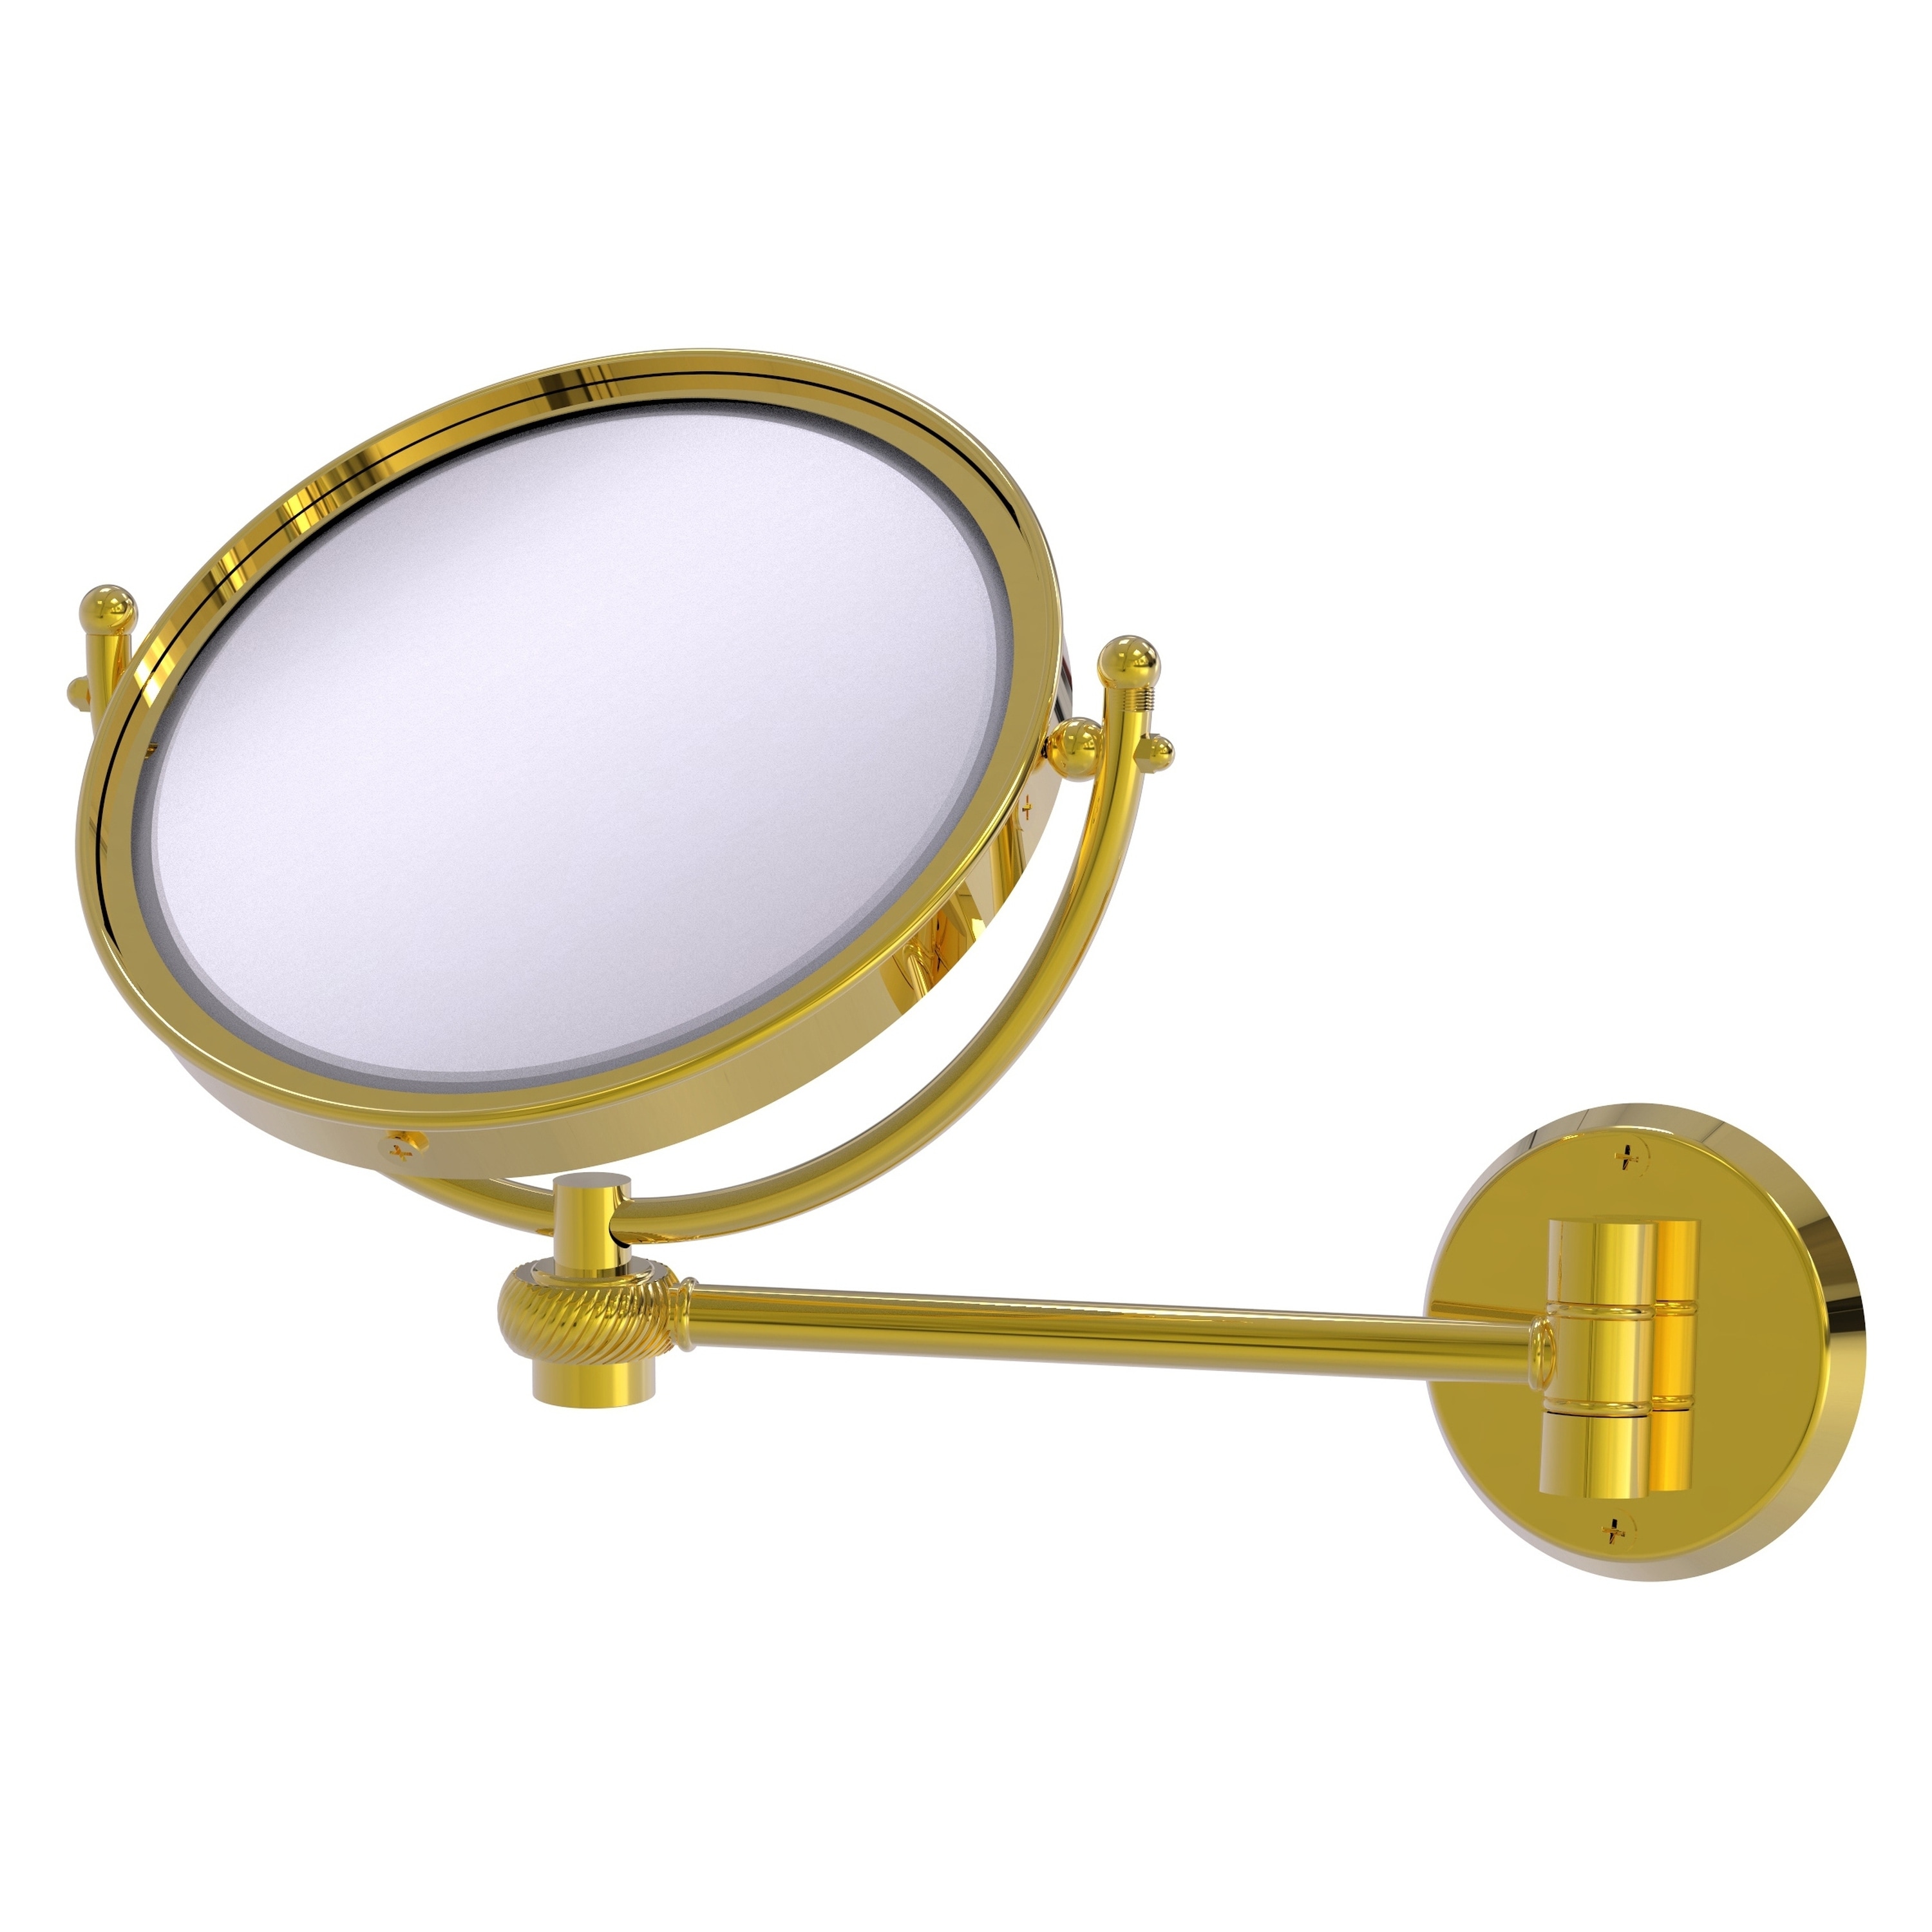 8-in x 10-in Polished Silver Double-sided 5X Magnifying Wall-mounted Vanity Mirror | - Allied Brass WM-5T/5X-PB